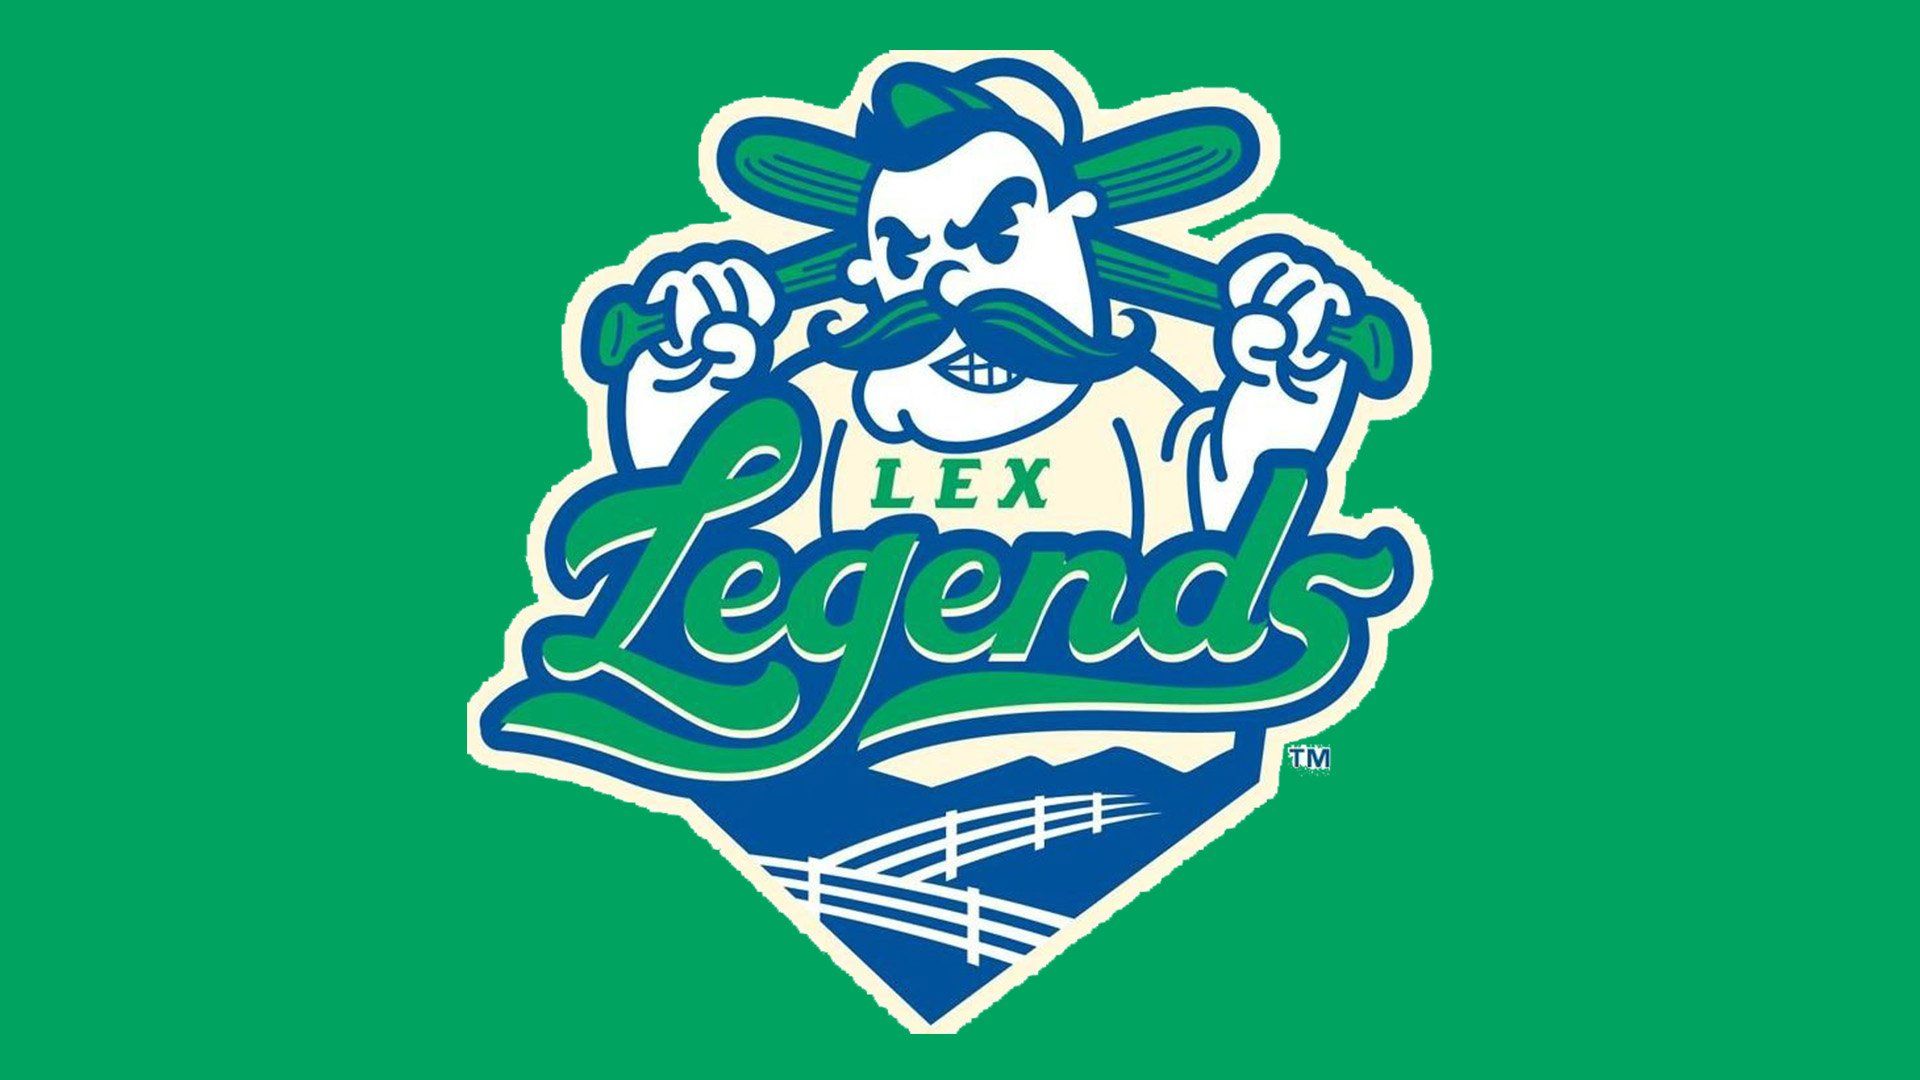 Lexington Legends logo and symbol, meaning, history, PNG